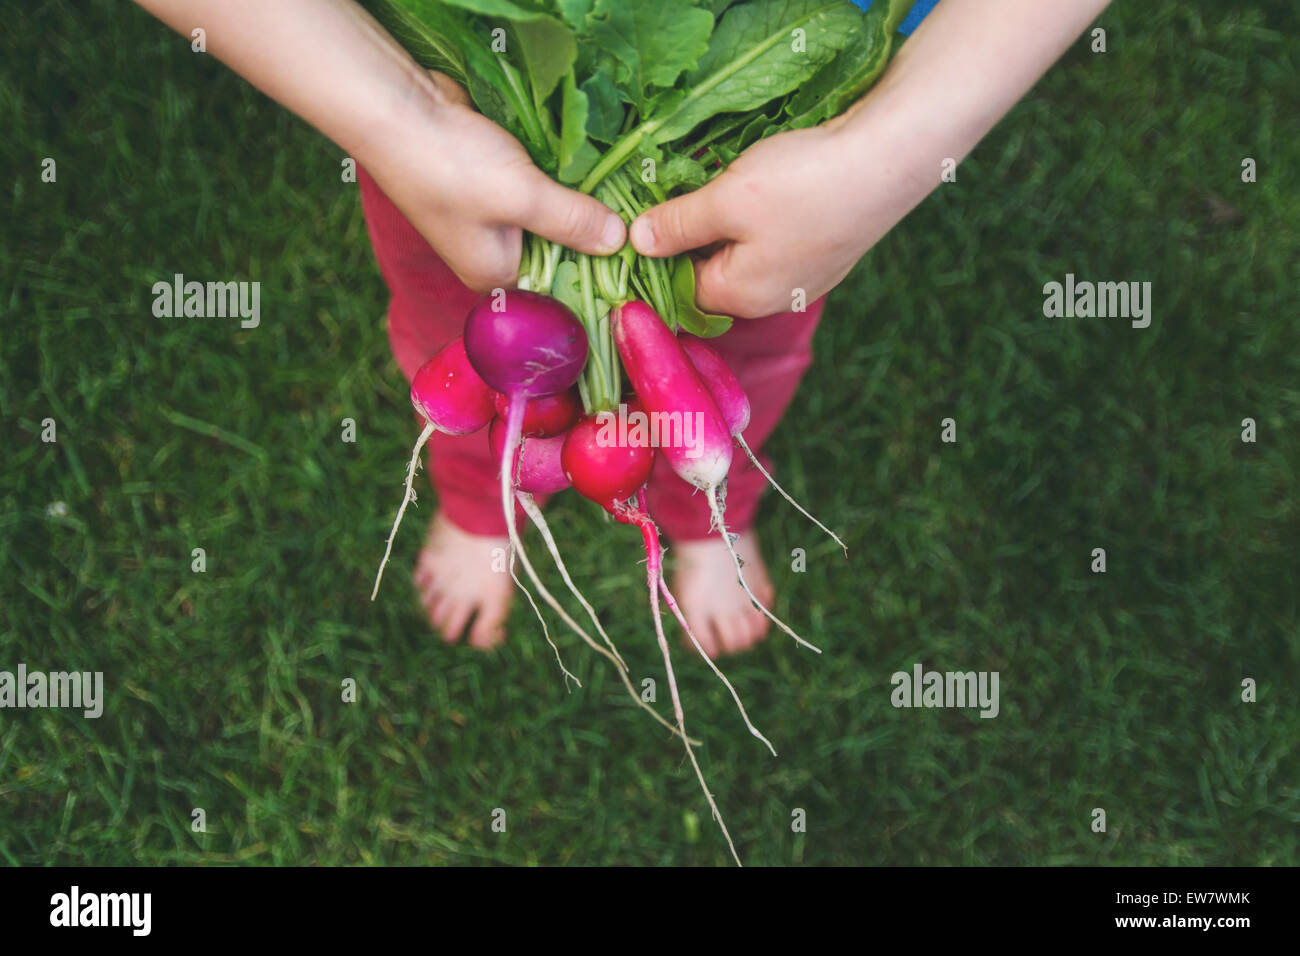 Overhead view of a boy holding a bunch of freshly picked radishes Stock Photo